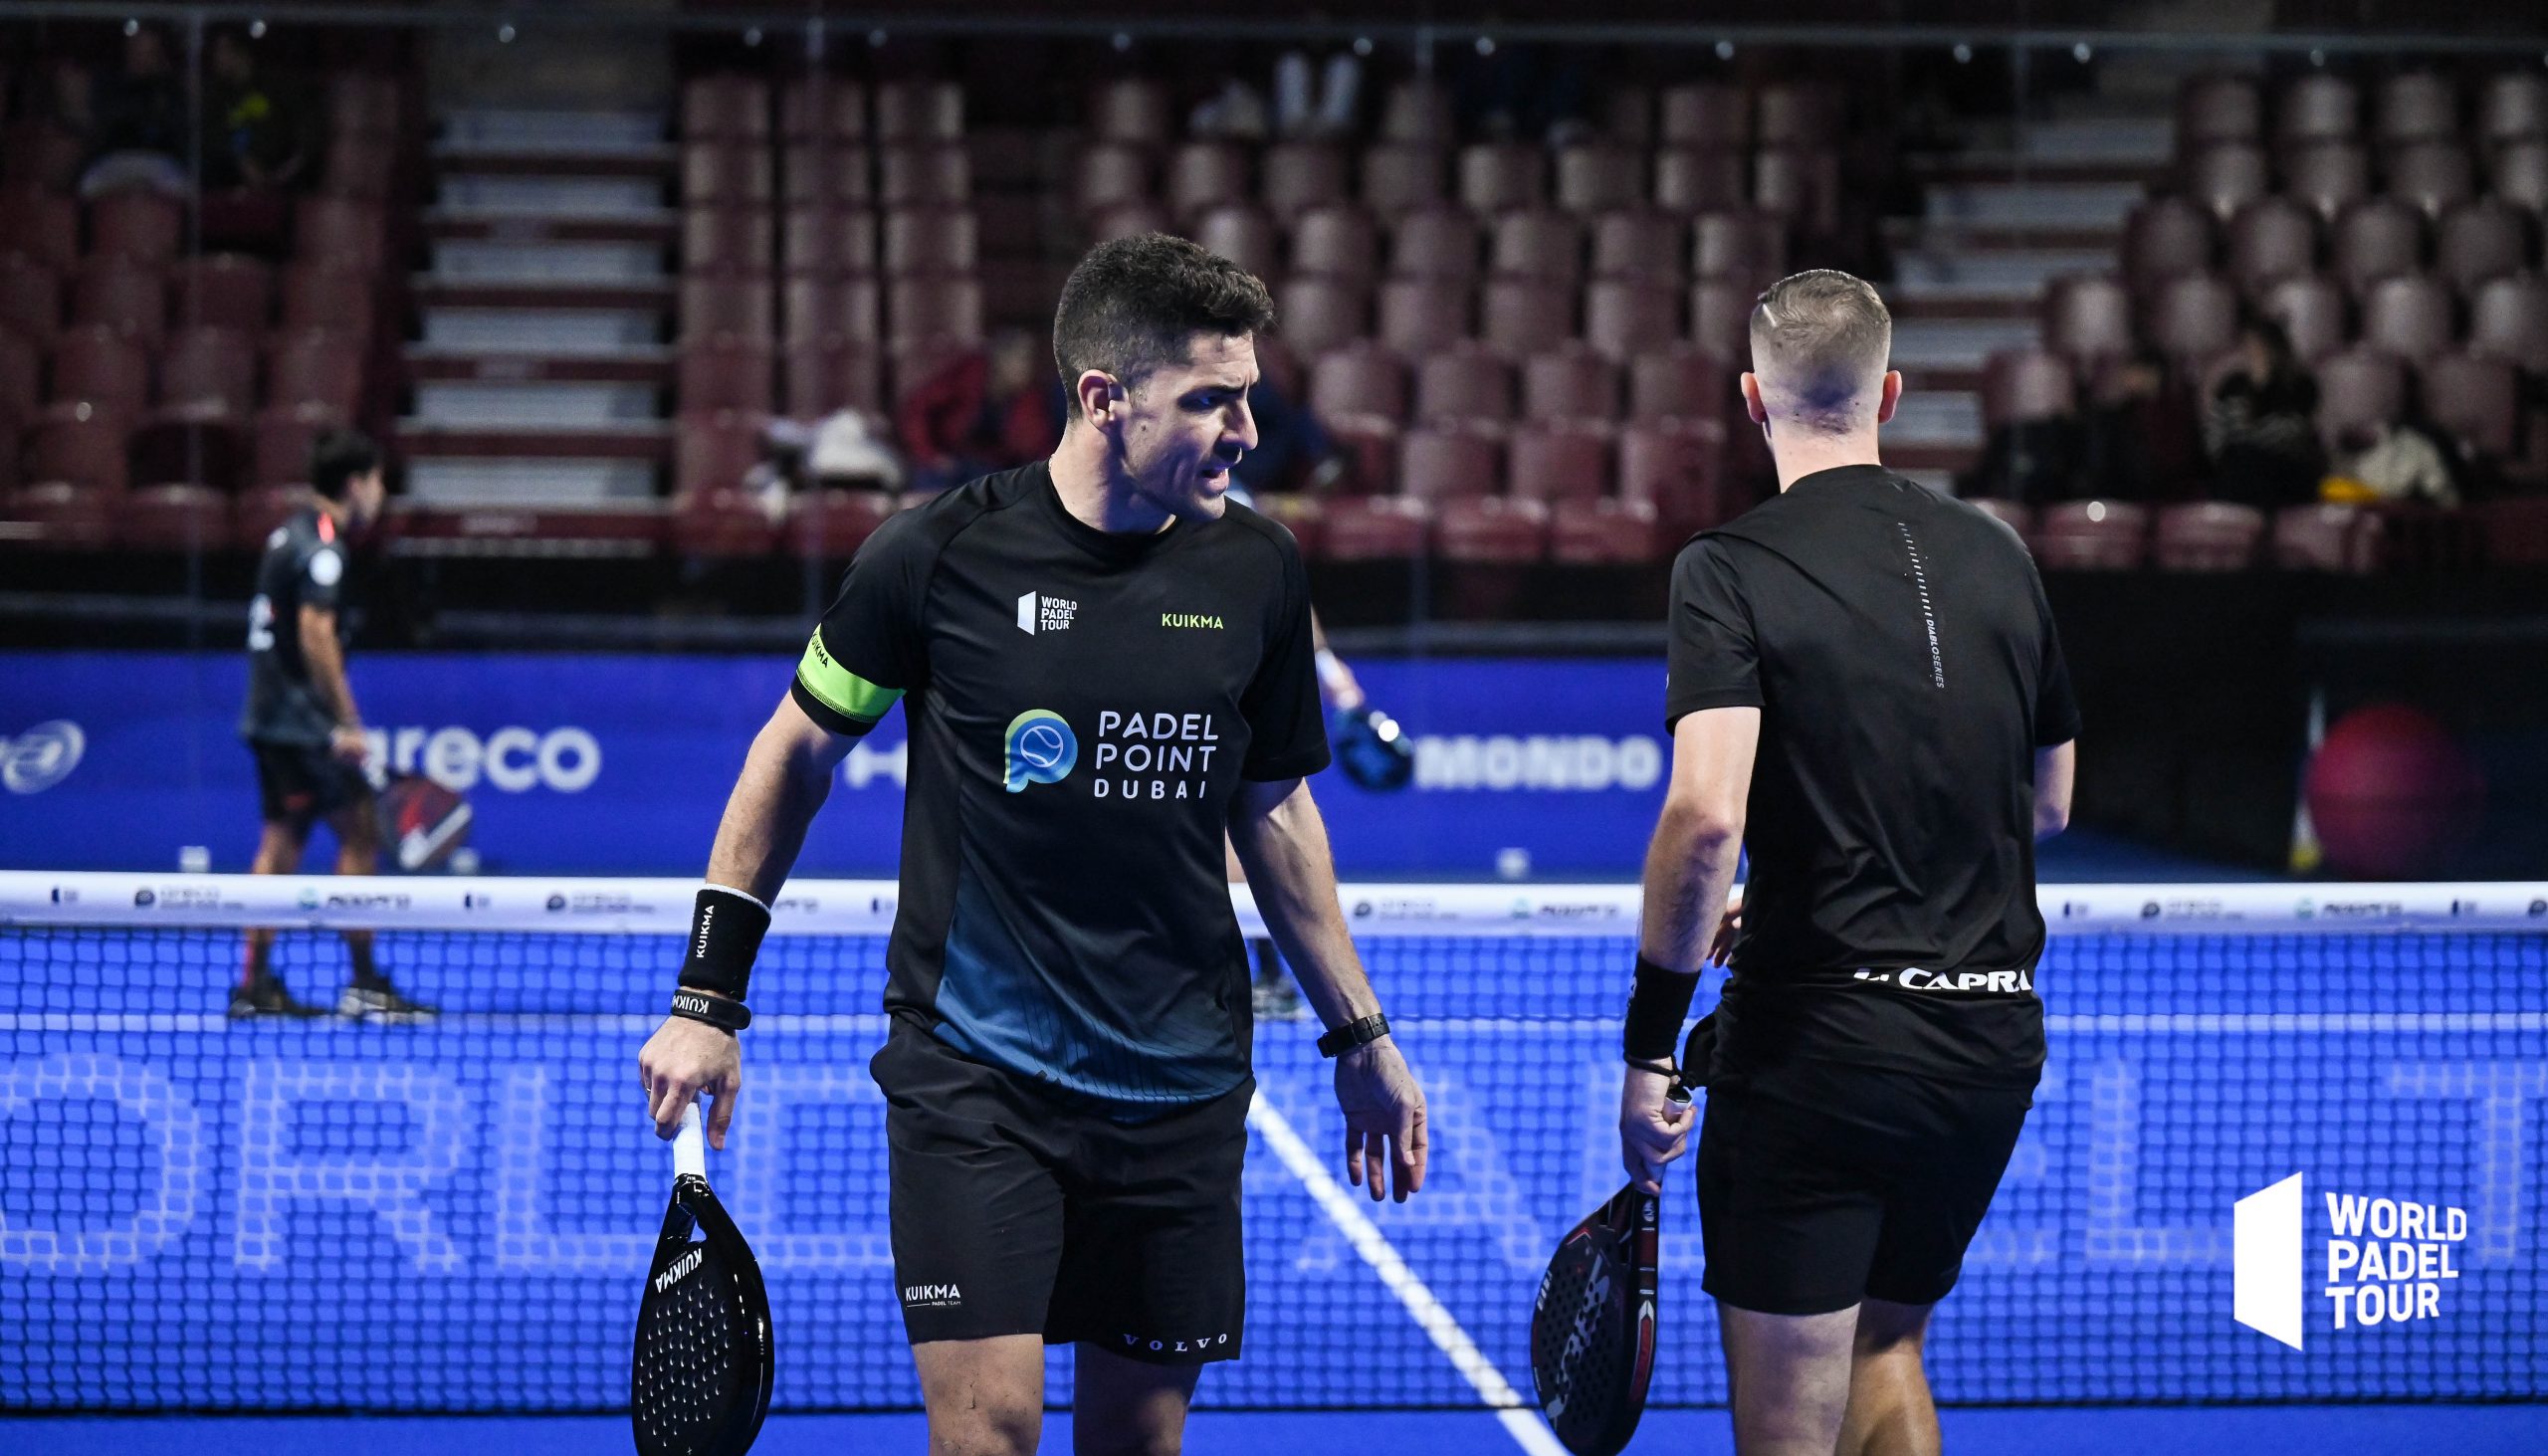 Chingotto and Garrido crash out in World Padel Tour debut, Ruiz and Gonzalez sent home early